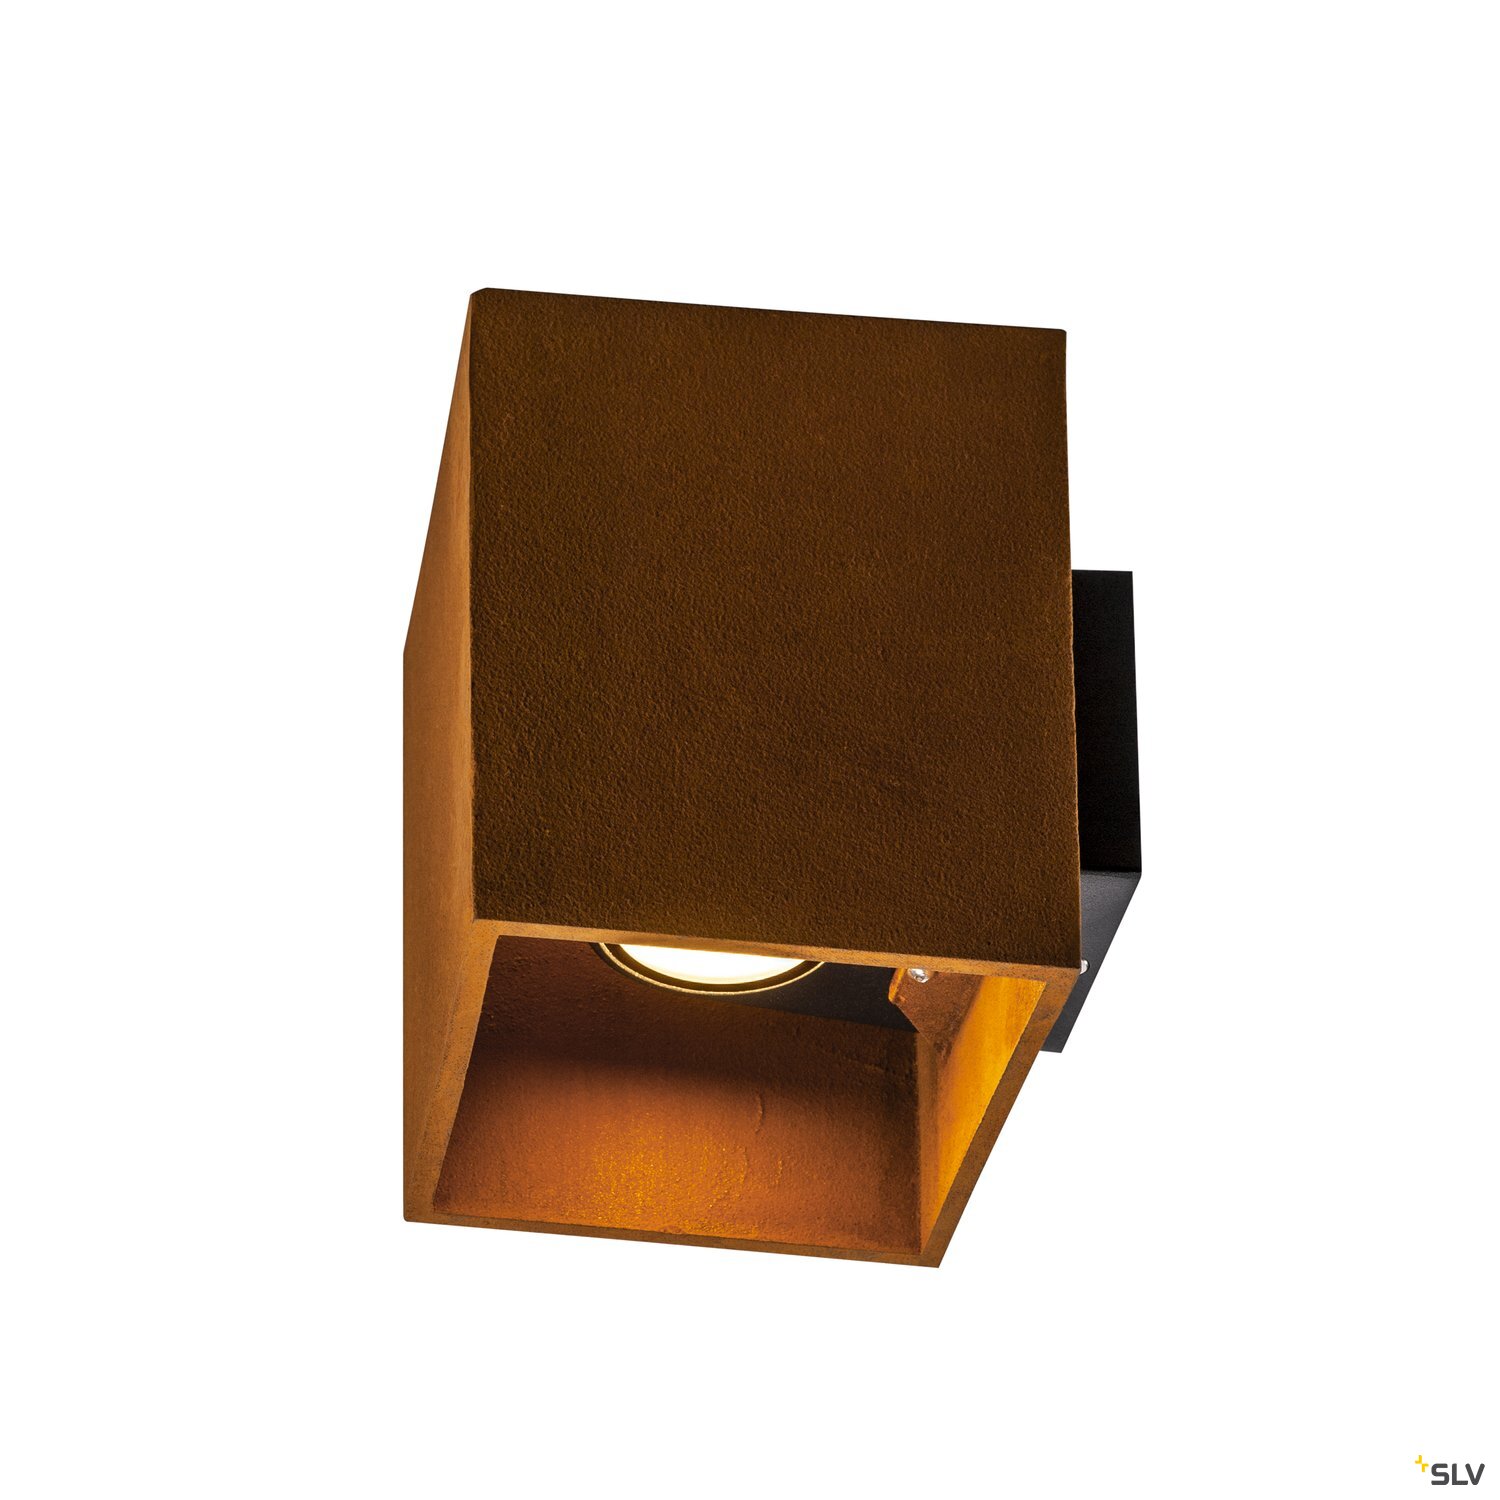 SLV LED Wall Light RUSTY UP/DOWN, 3000/4000K, square, rusty brown, IP65 544lm